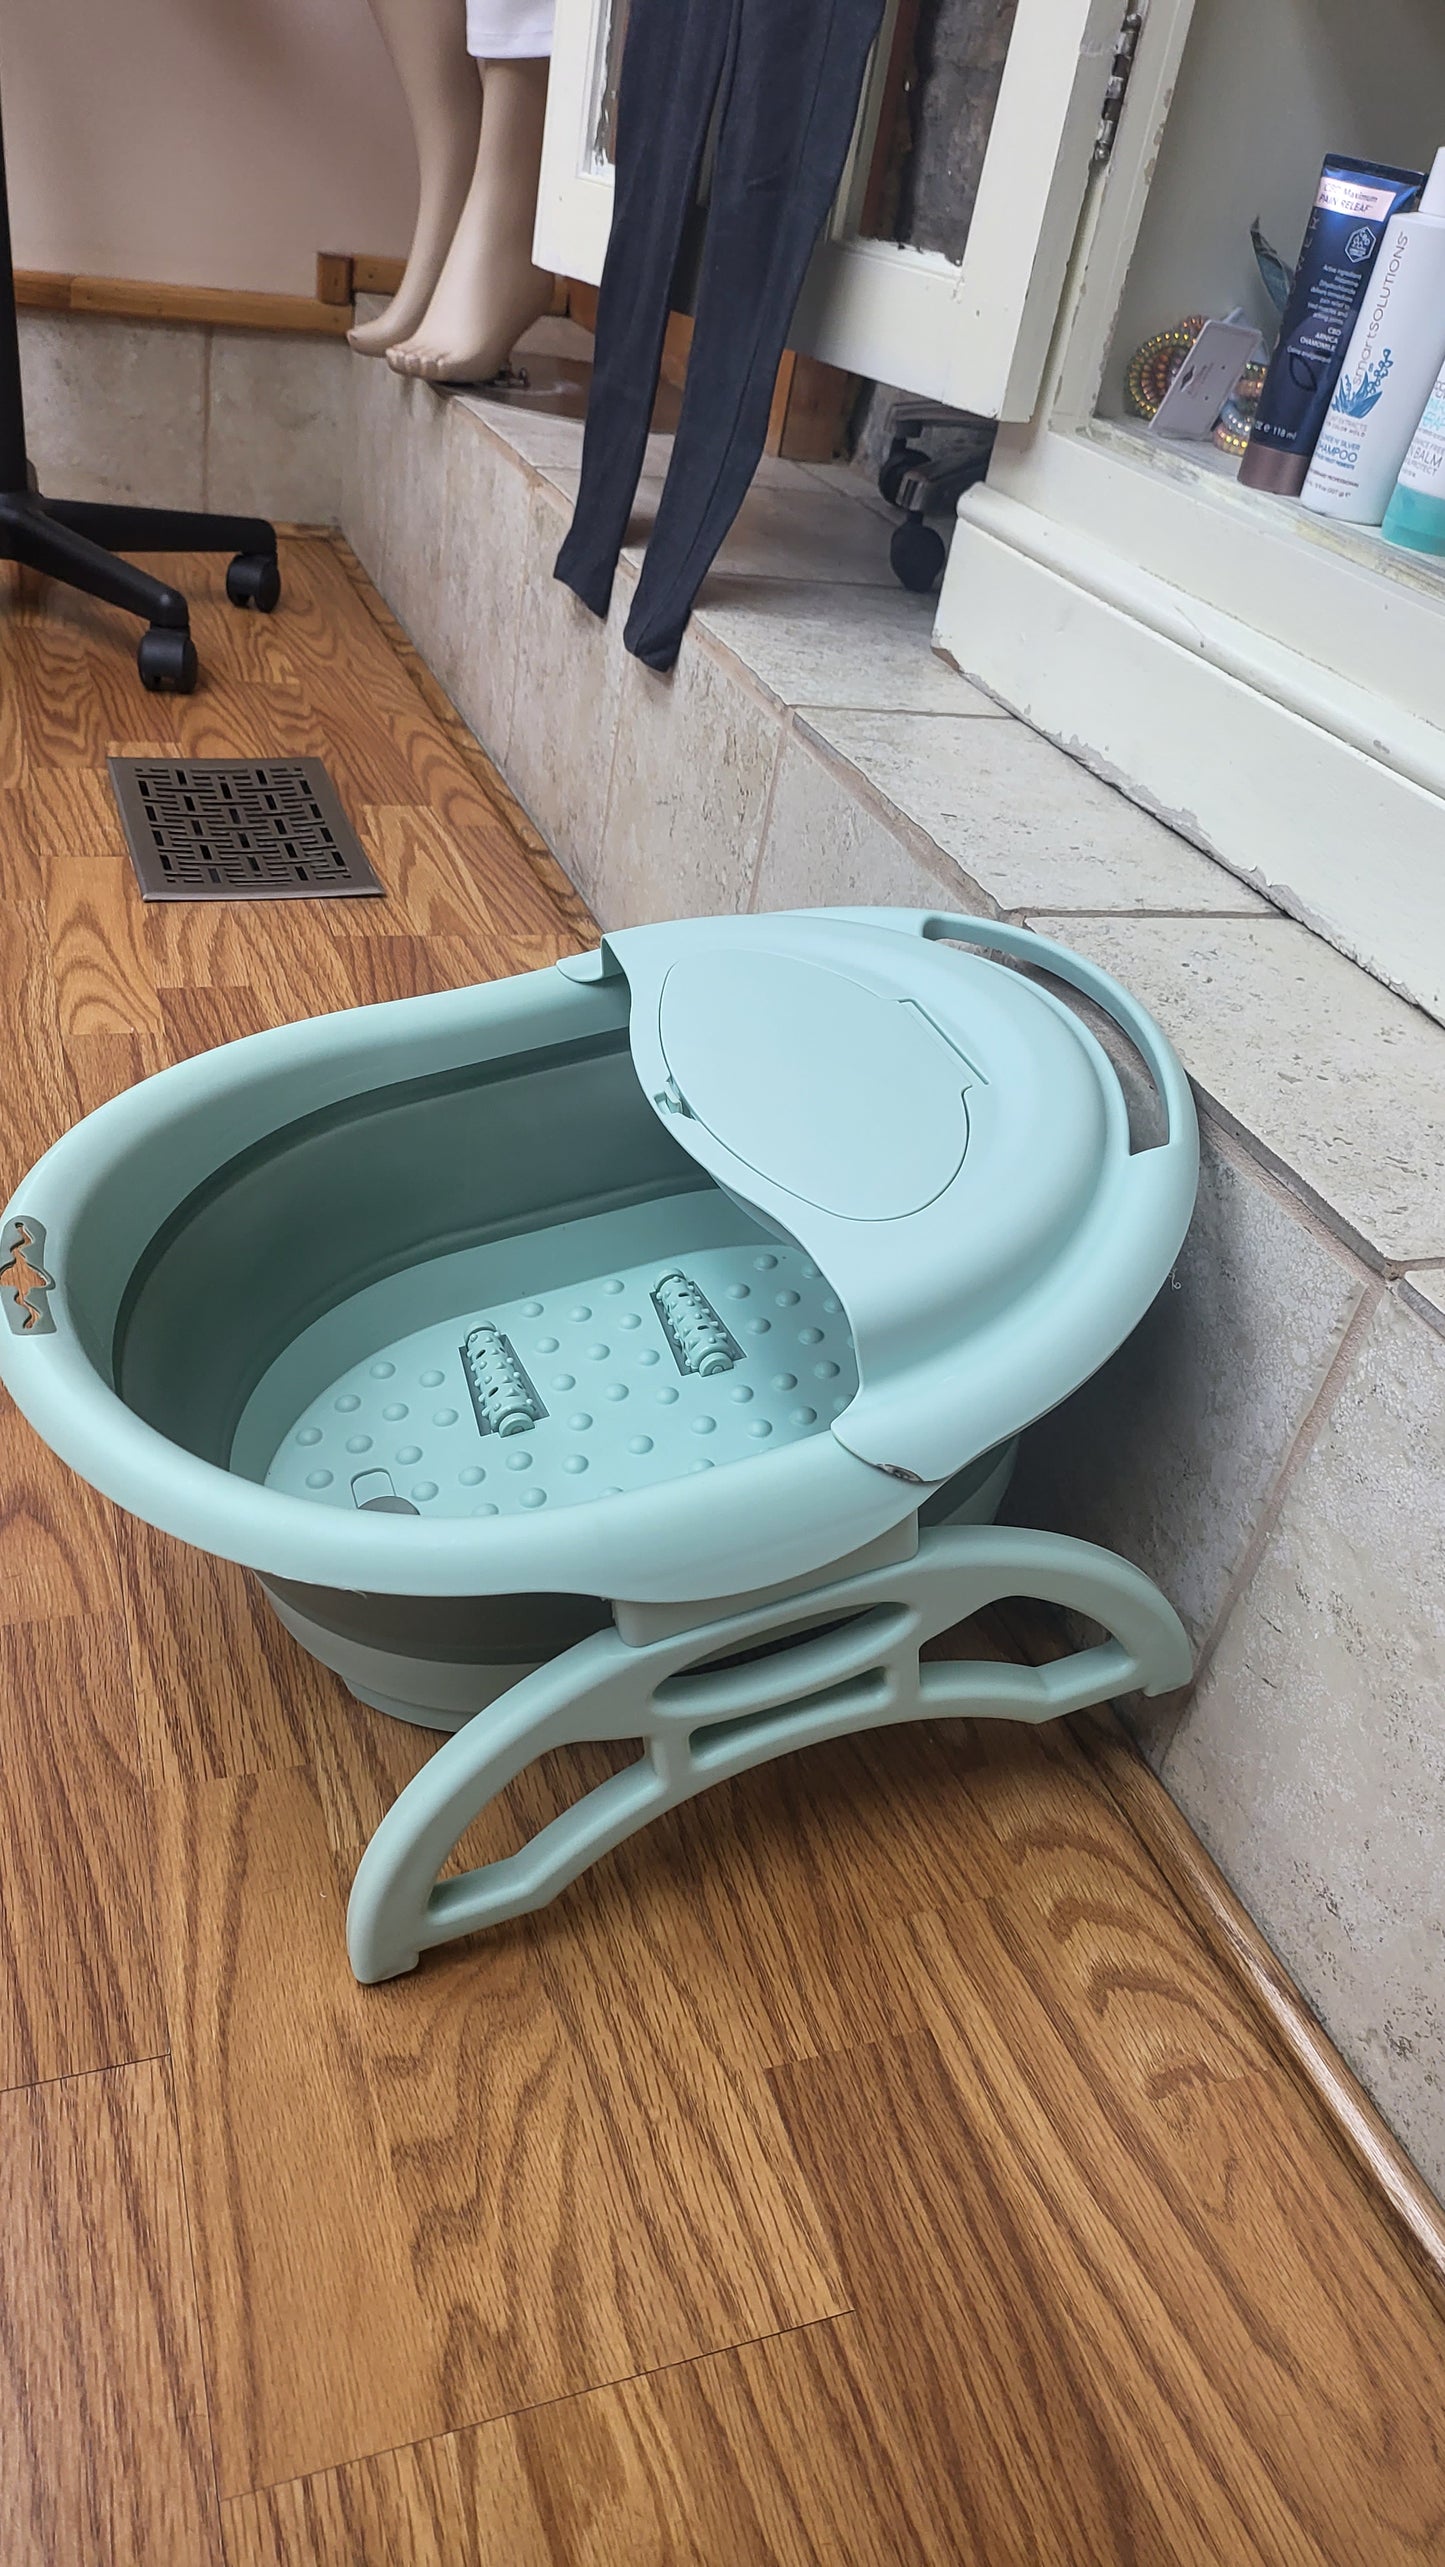 Foot tub the collapses with locking Sides for Nail Techs